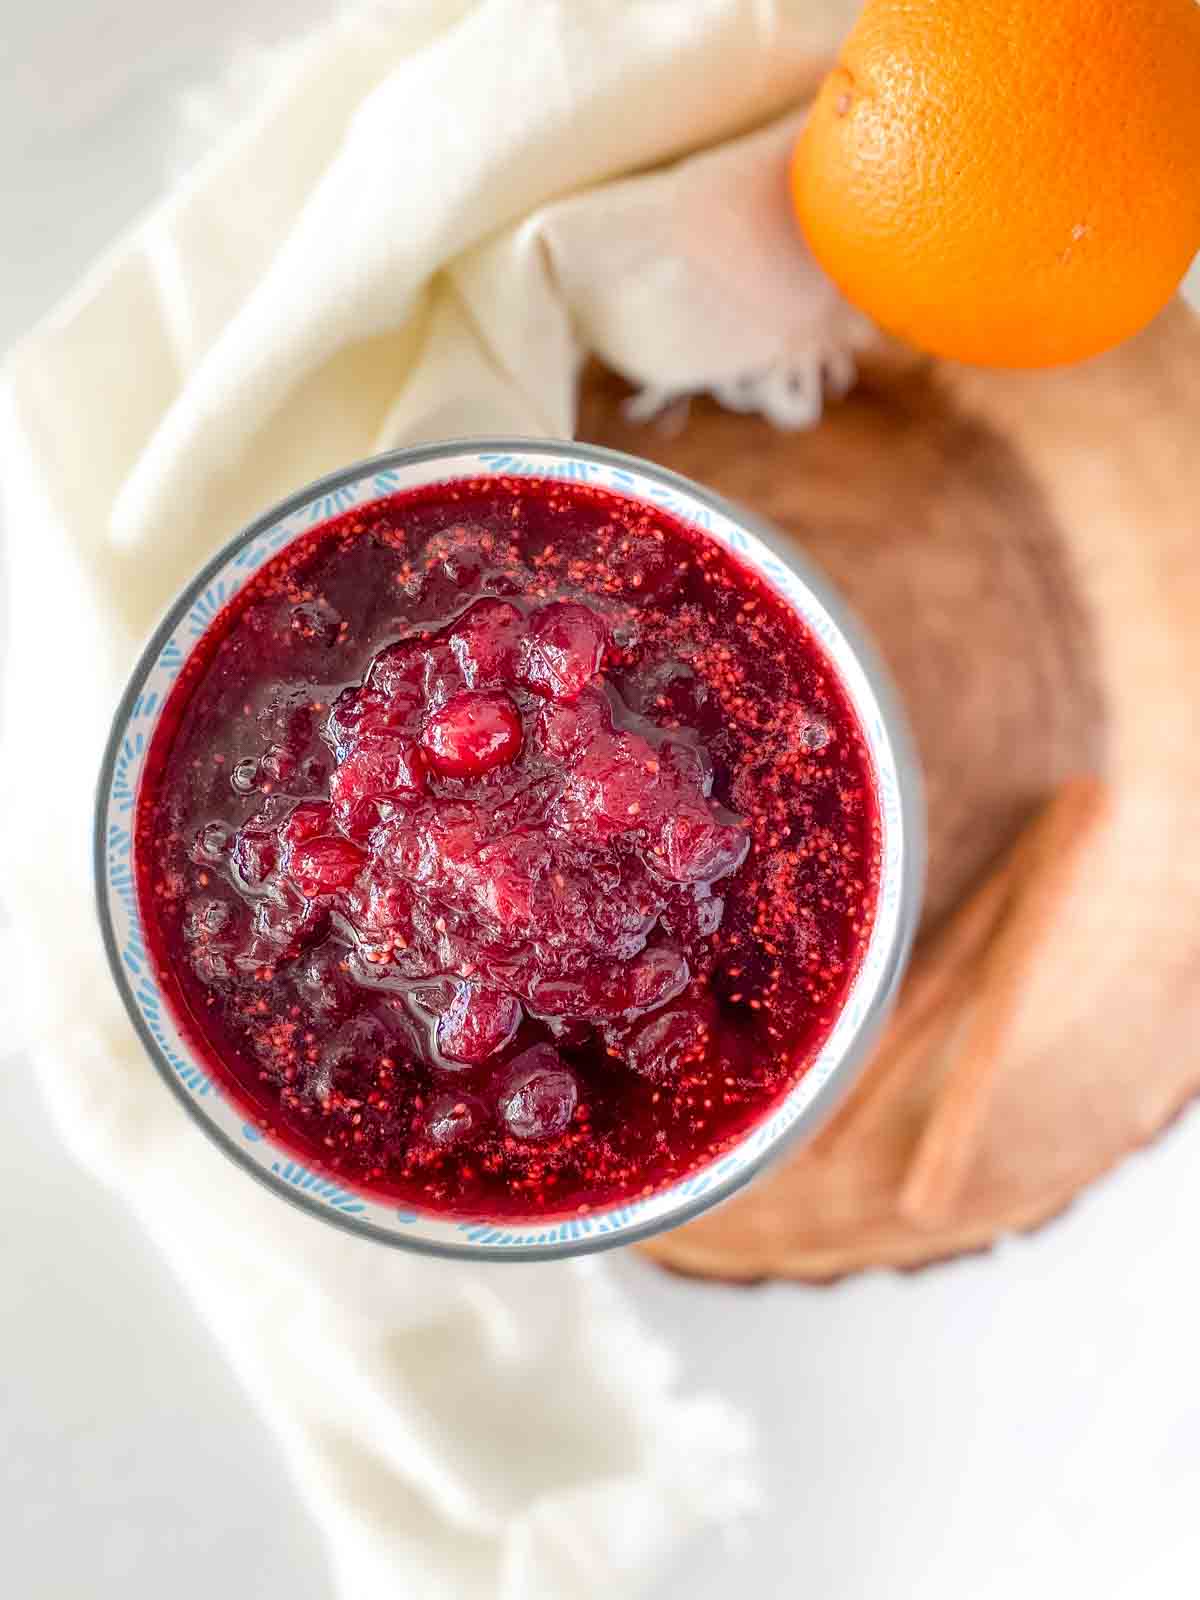 homemade cranberry sauce with an orange and cinnamon stick beside it